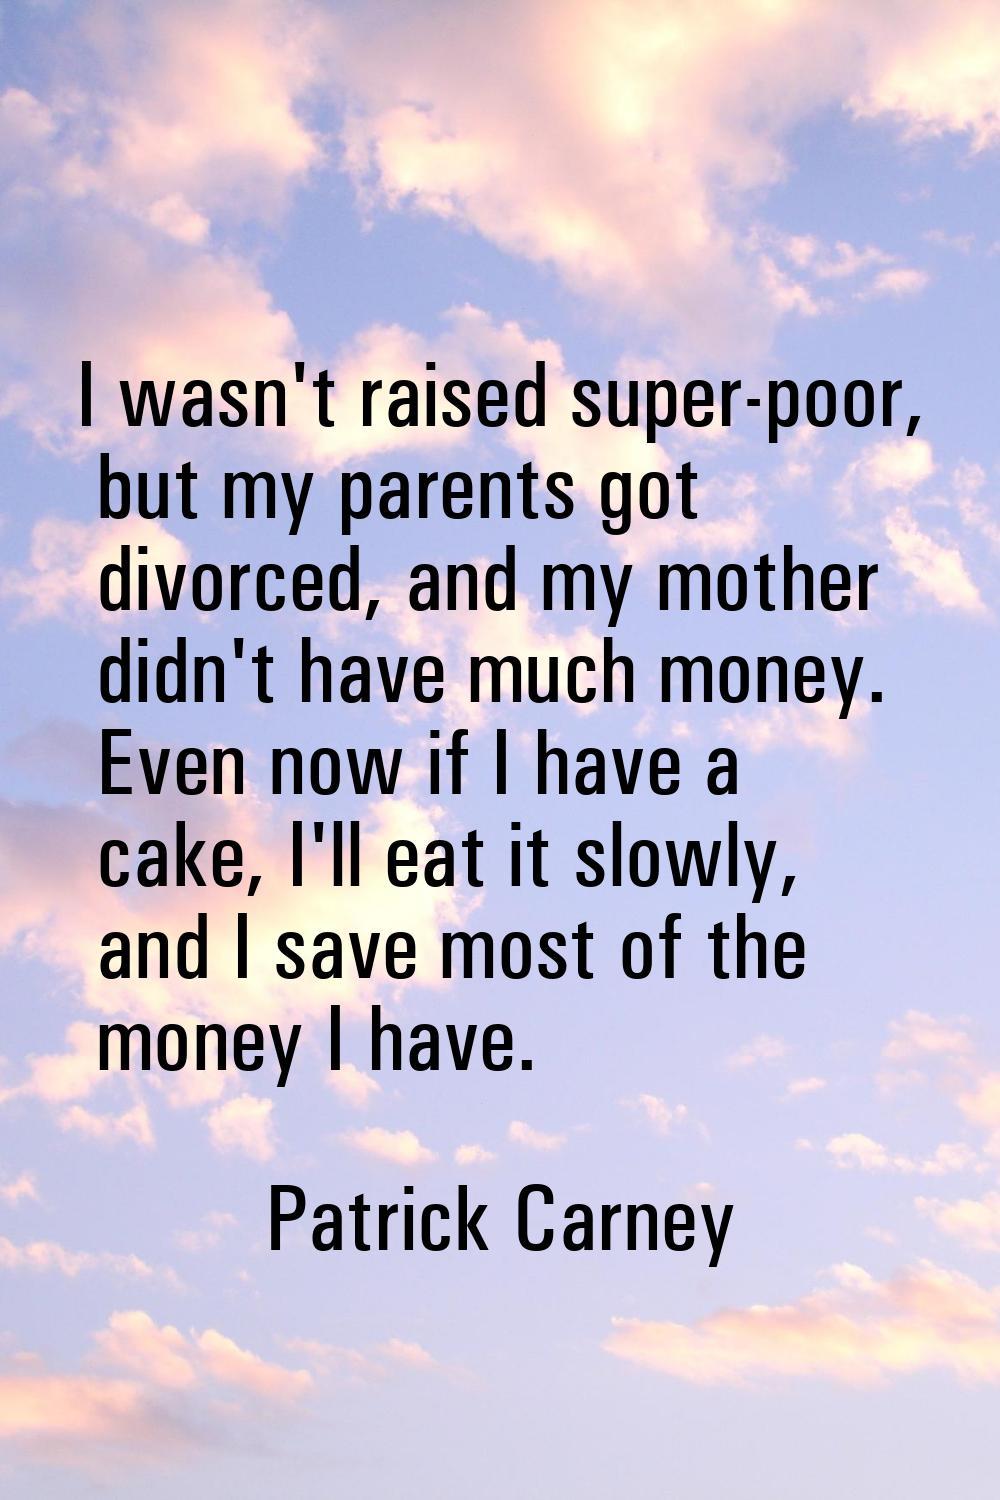 I wasn't raised super-poor, but my parents got divorced, and my mother didn't have much money. Even